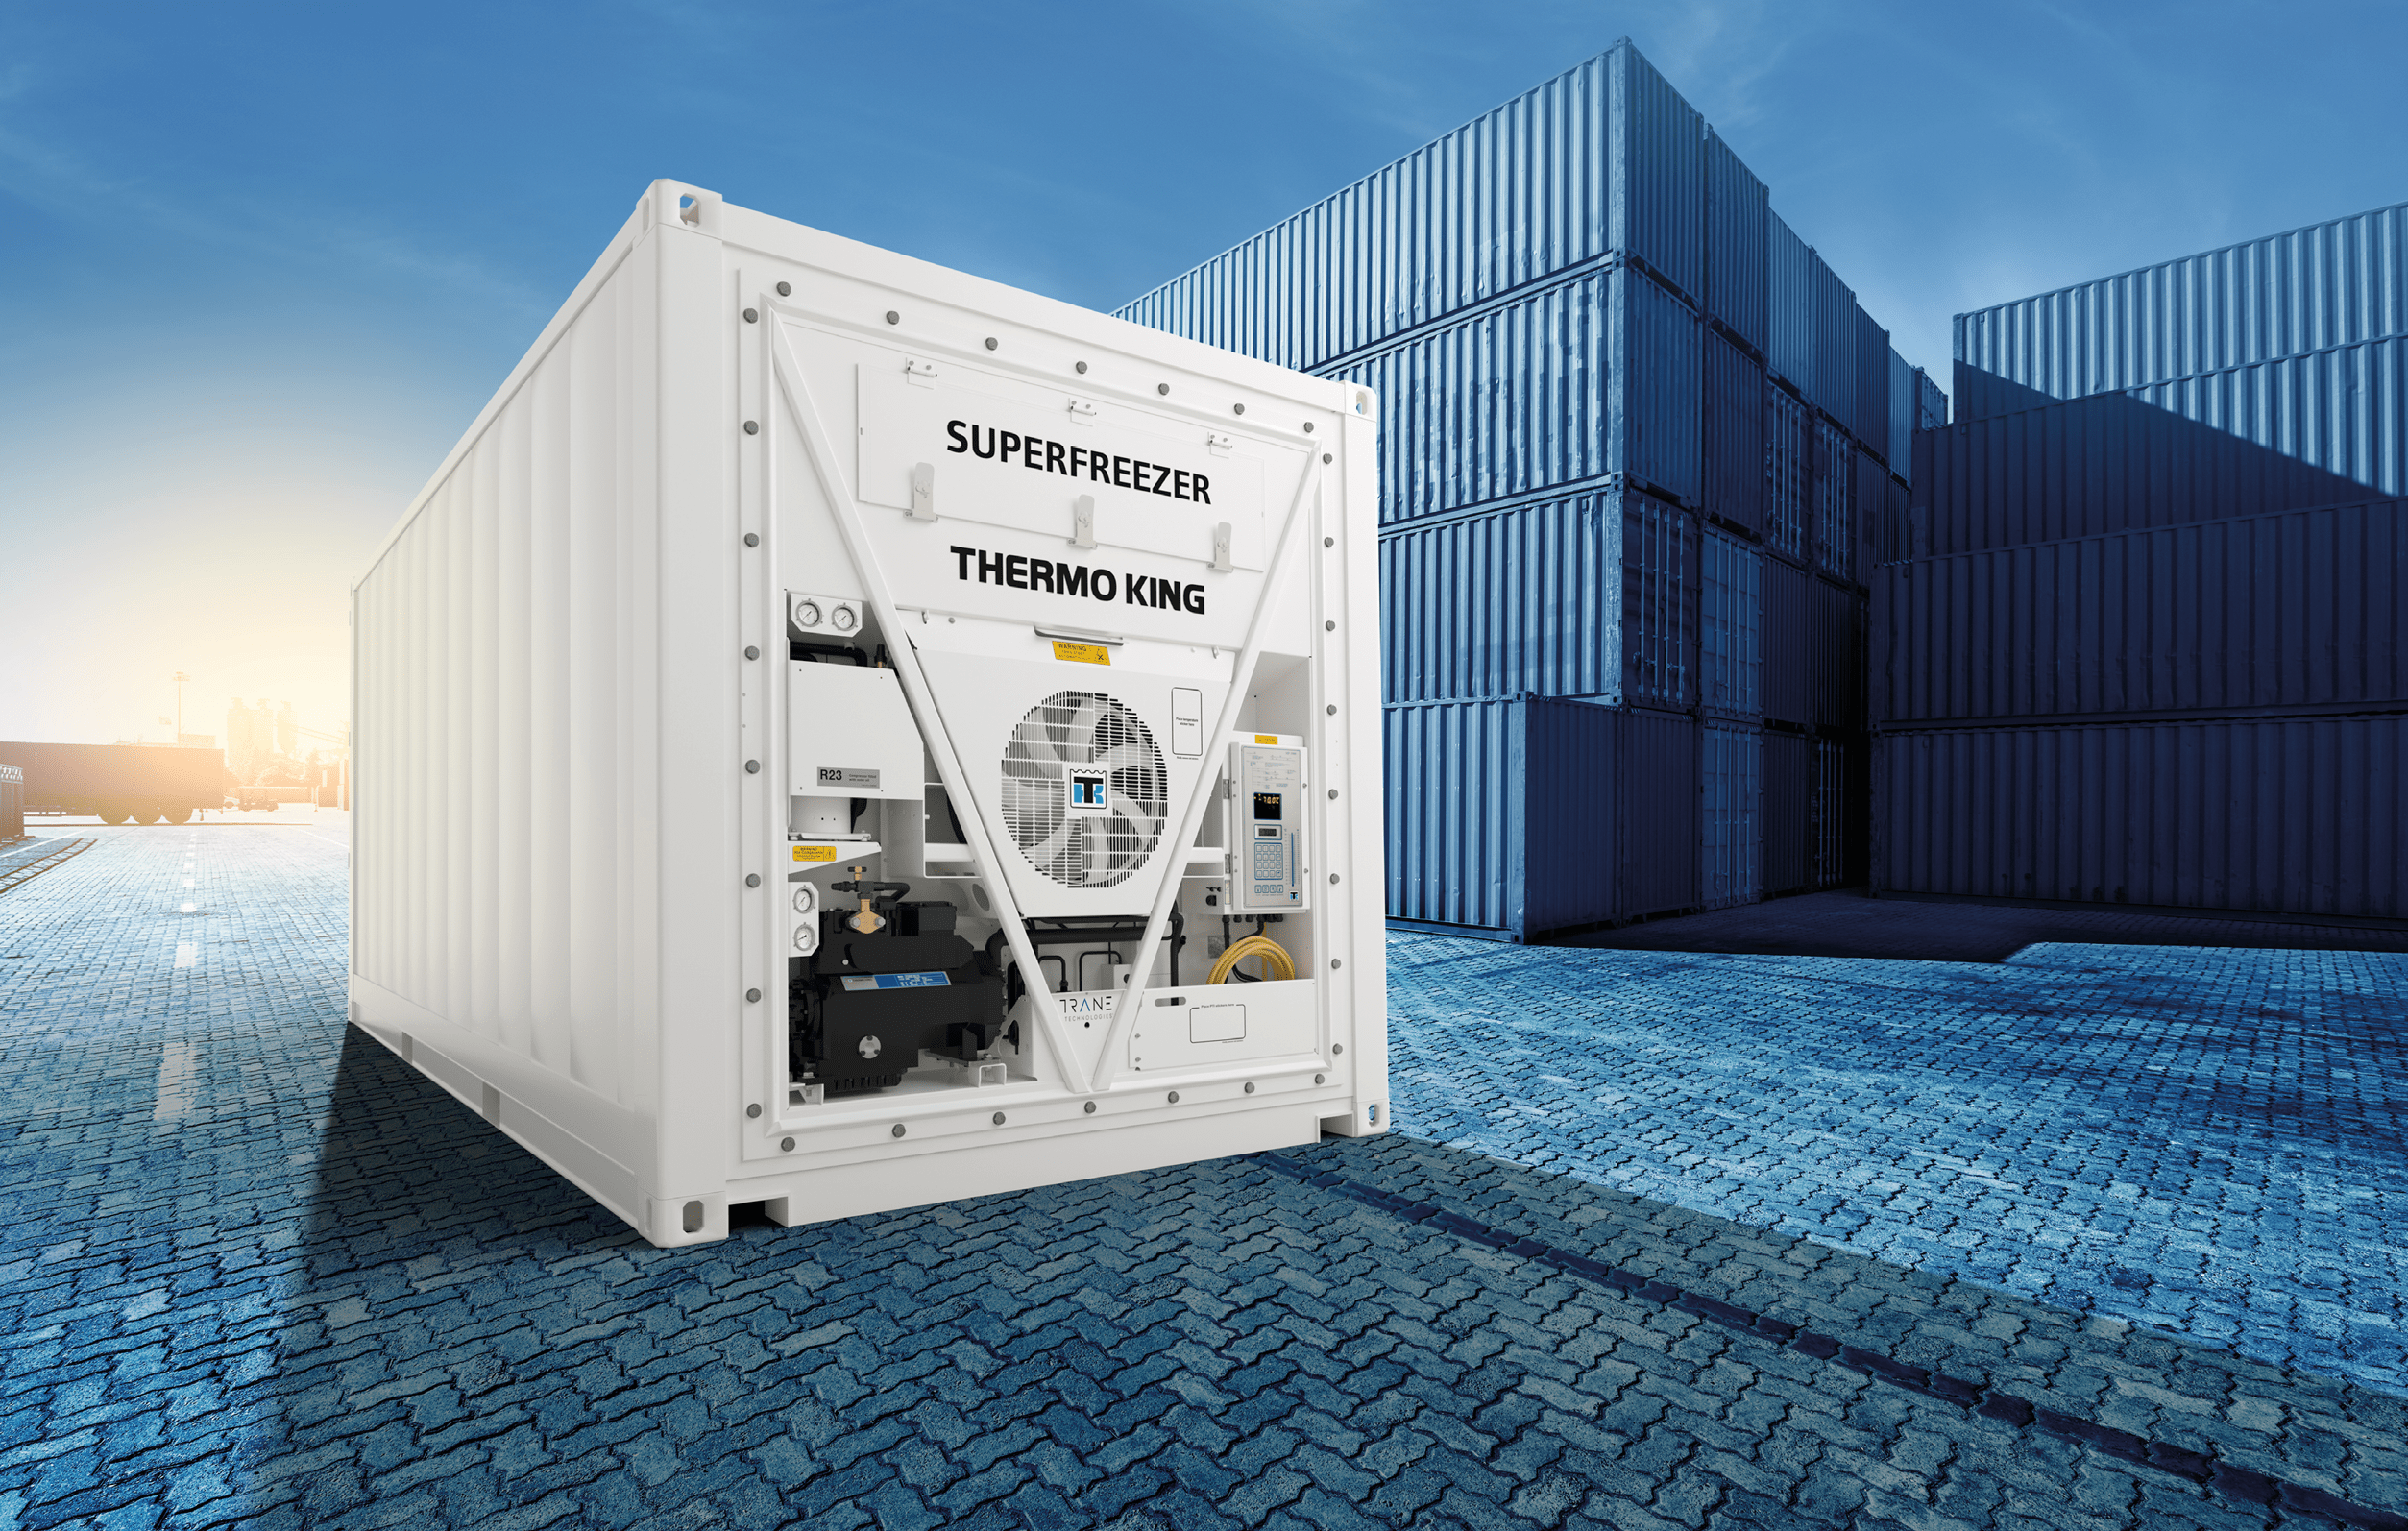 Containers box from Cargo freight ship for import export,logistic concept